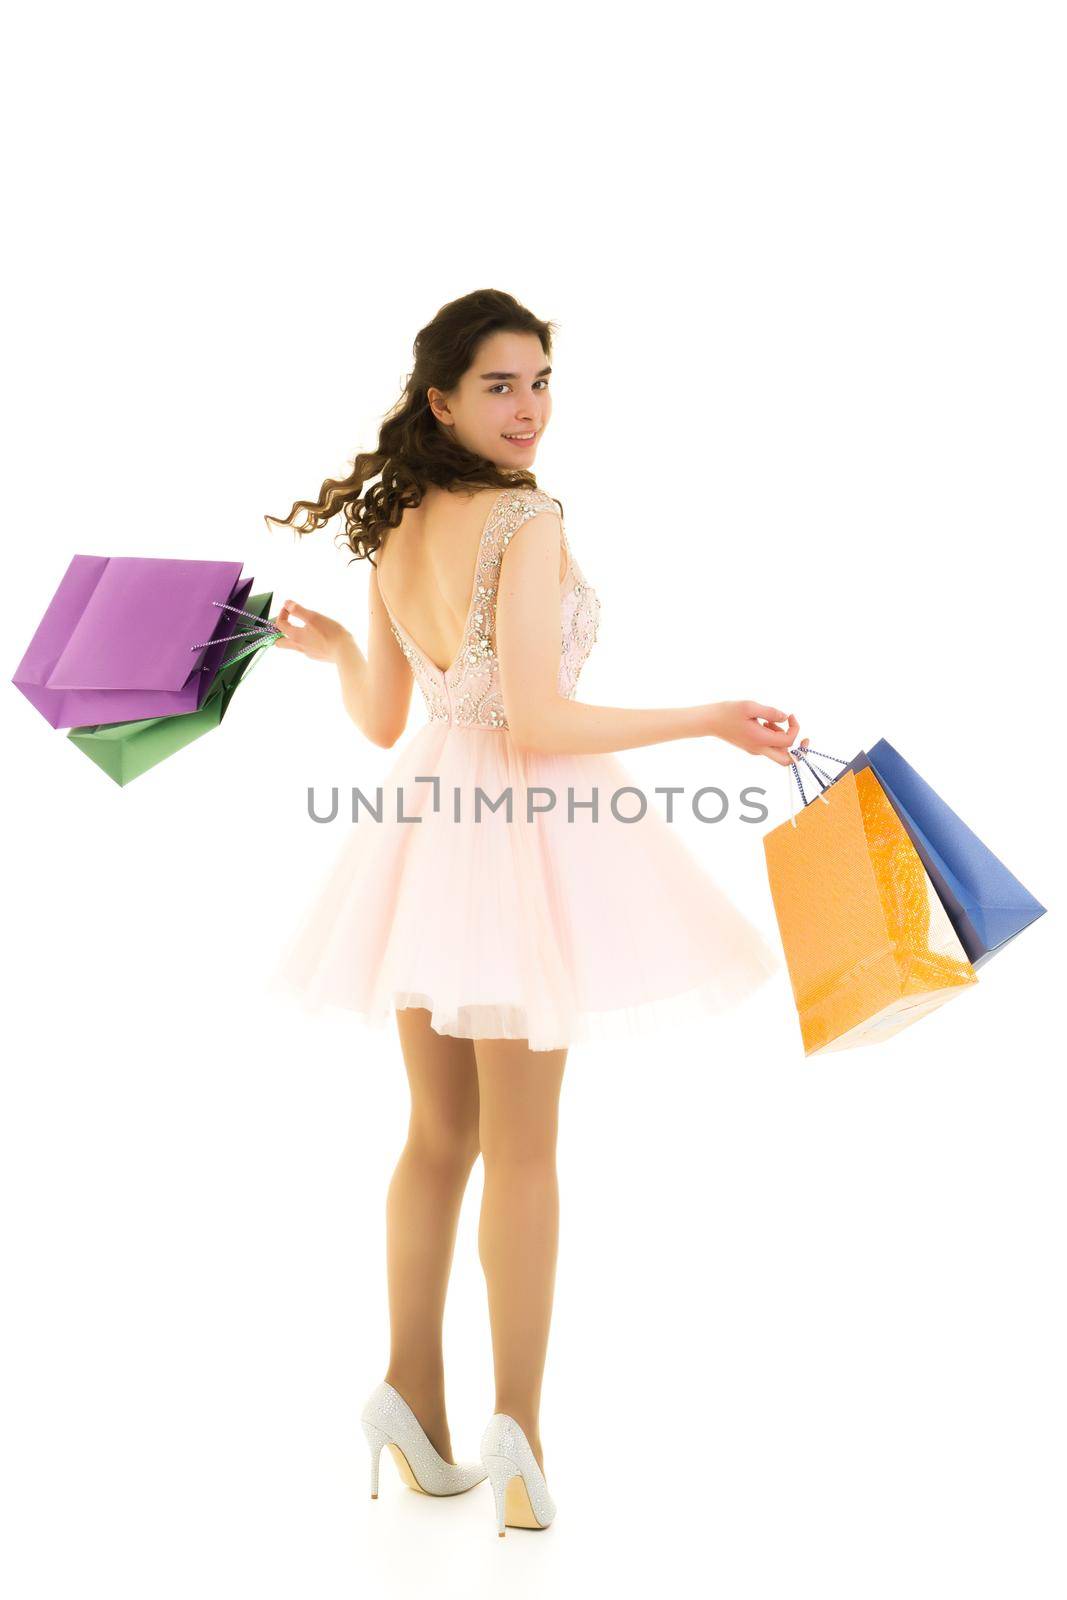 Teenager girl shopping in a store with large paper bags. by kolesnikov_studio